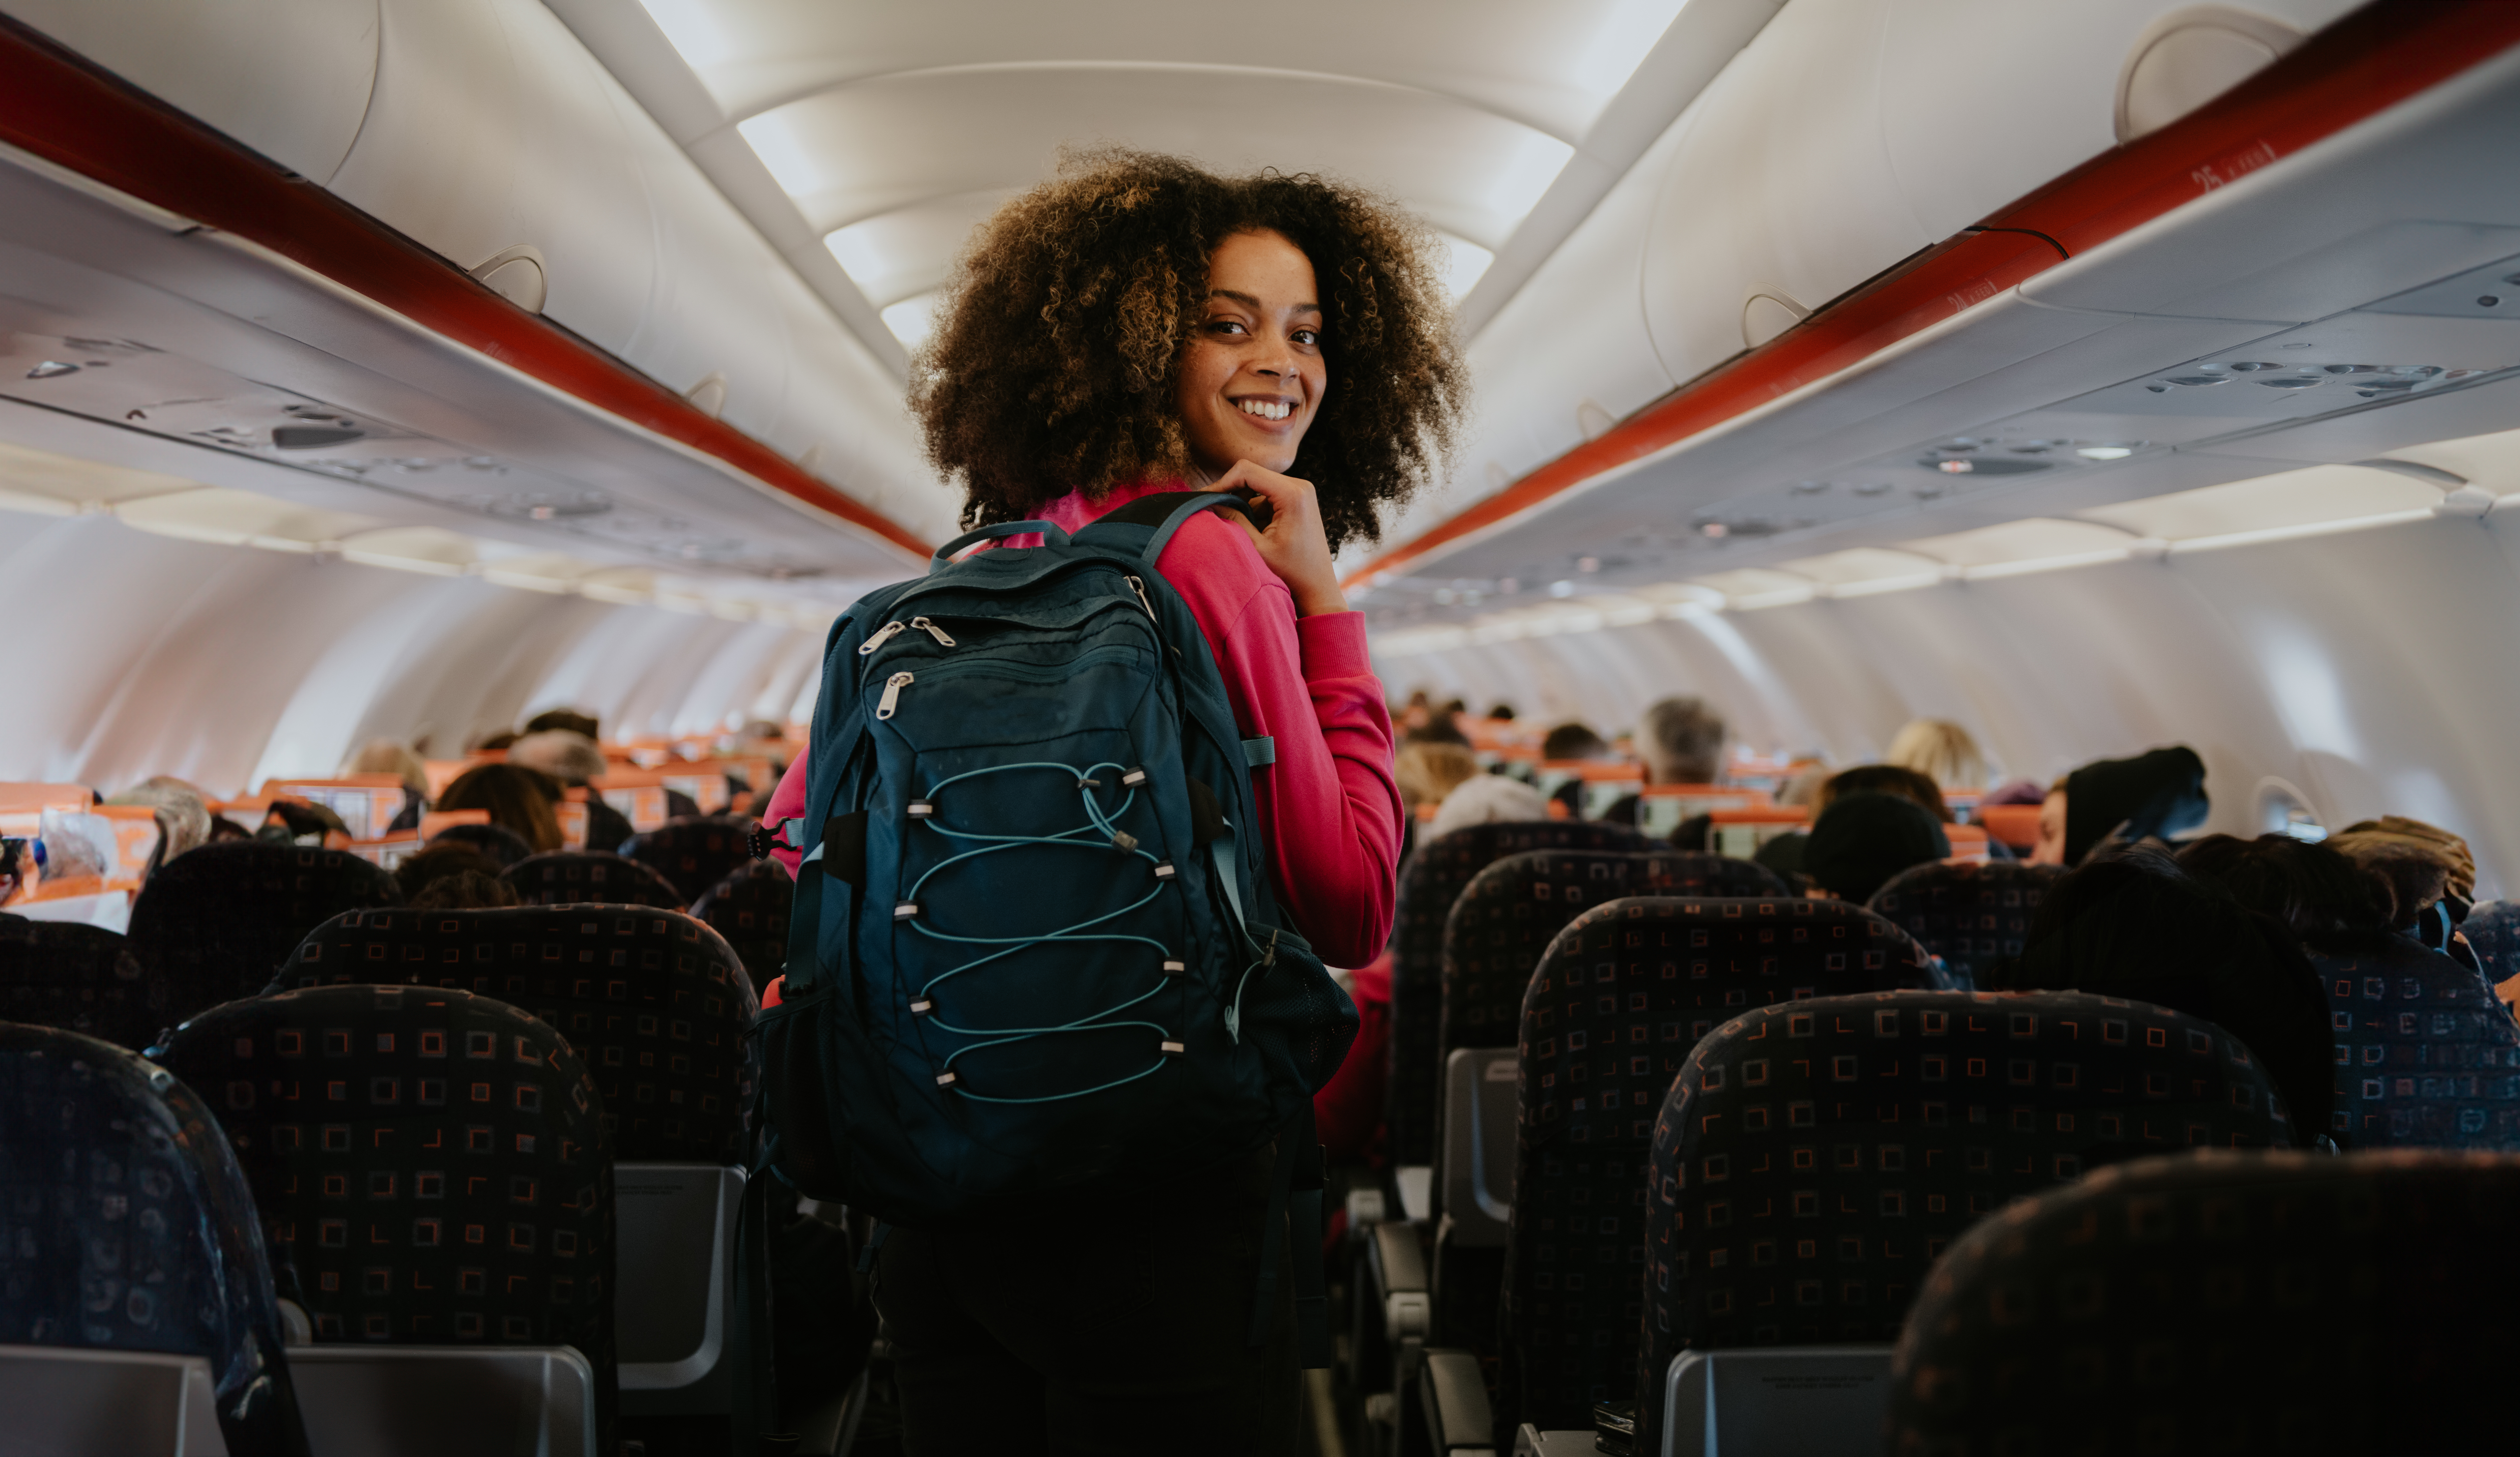 Getting a good seat on a plane can be the perfect way to start a holiday (stock image)